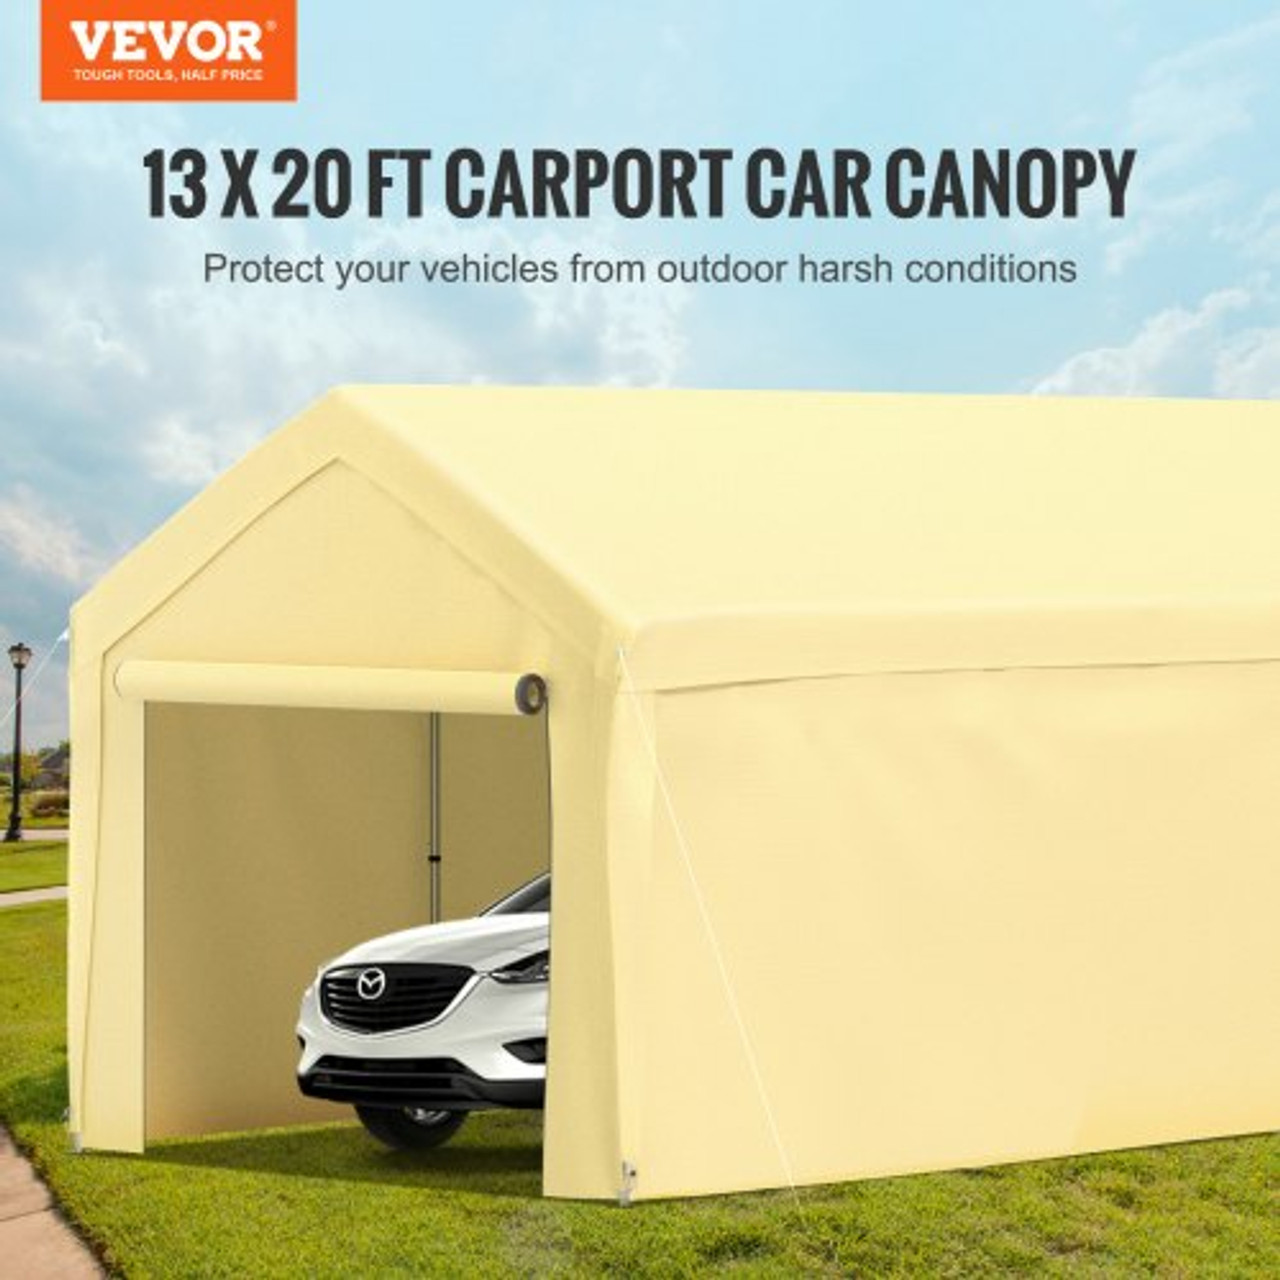 Carport Canopy Car Shelter Tent 13 x 20ft with 8 Legs and Sidewalls Yellow